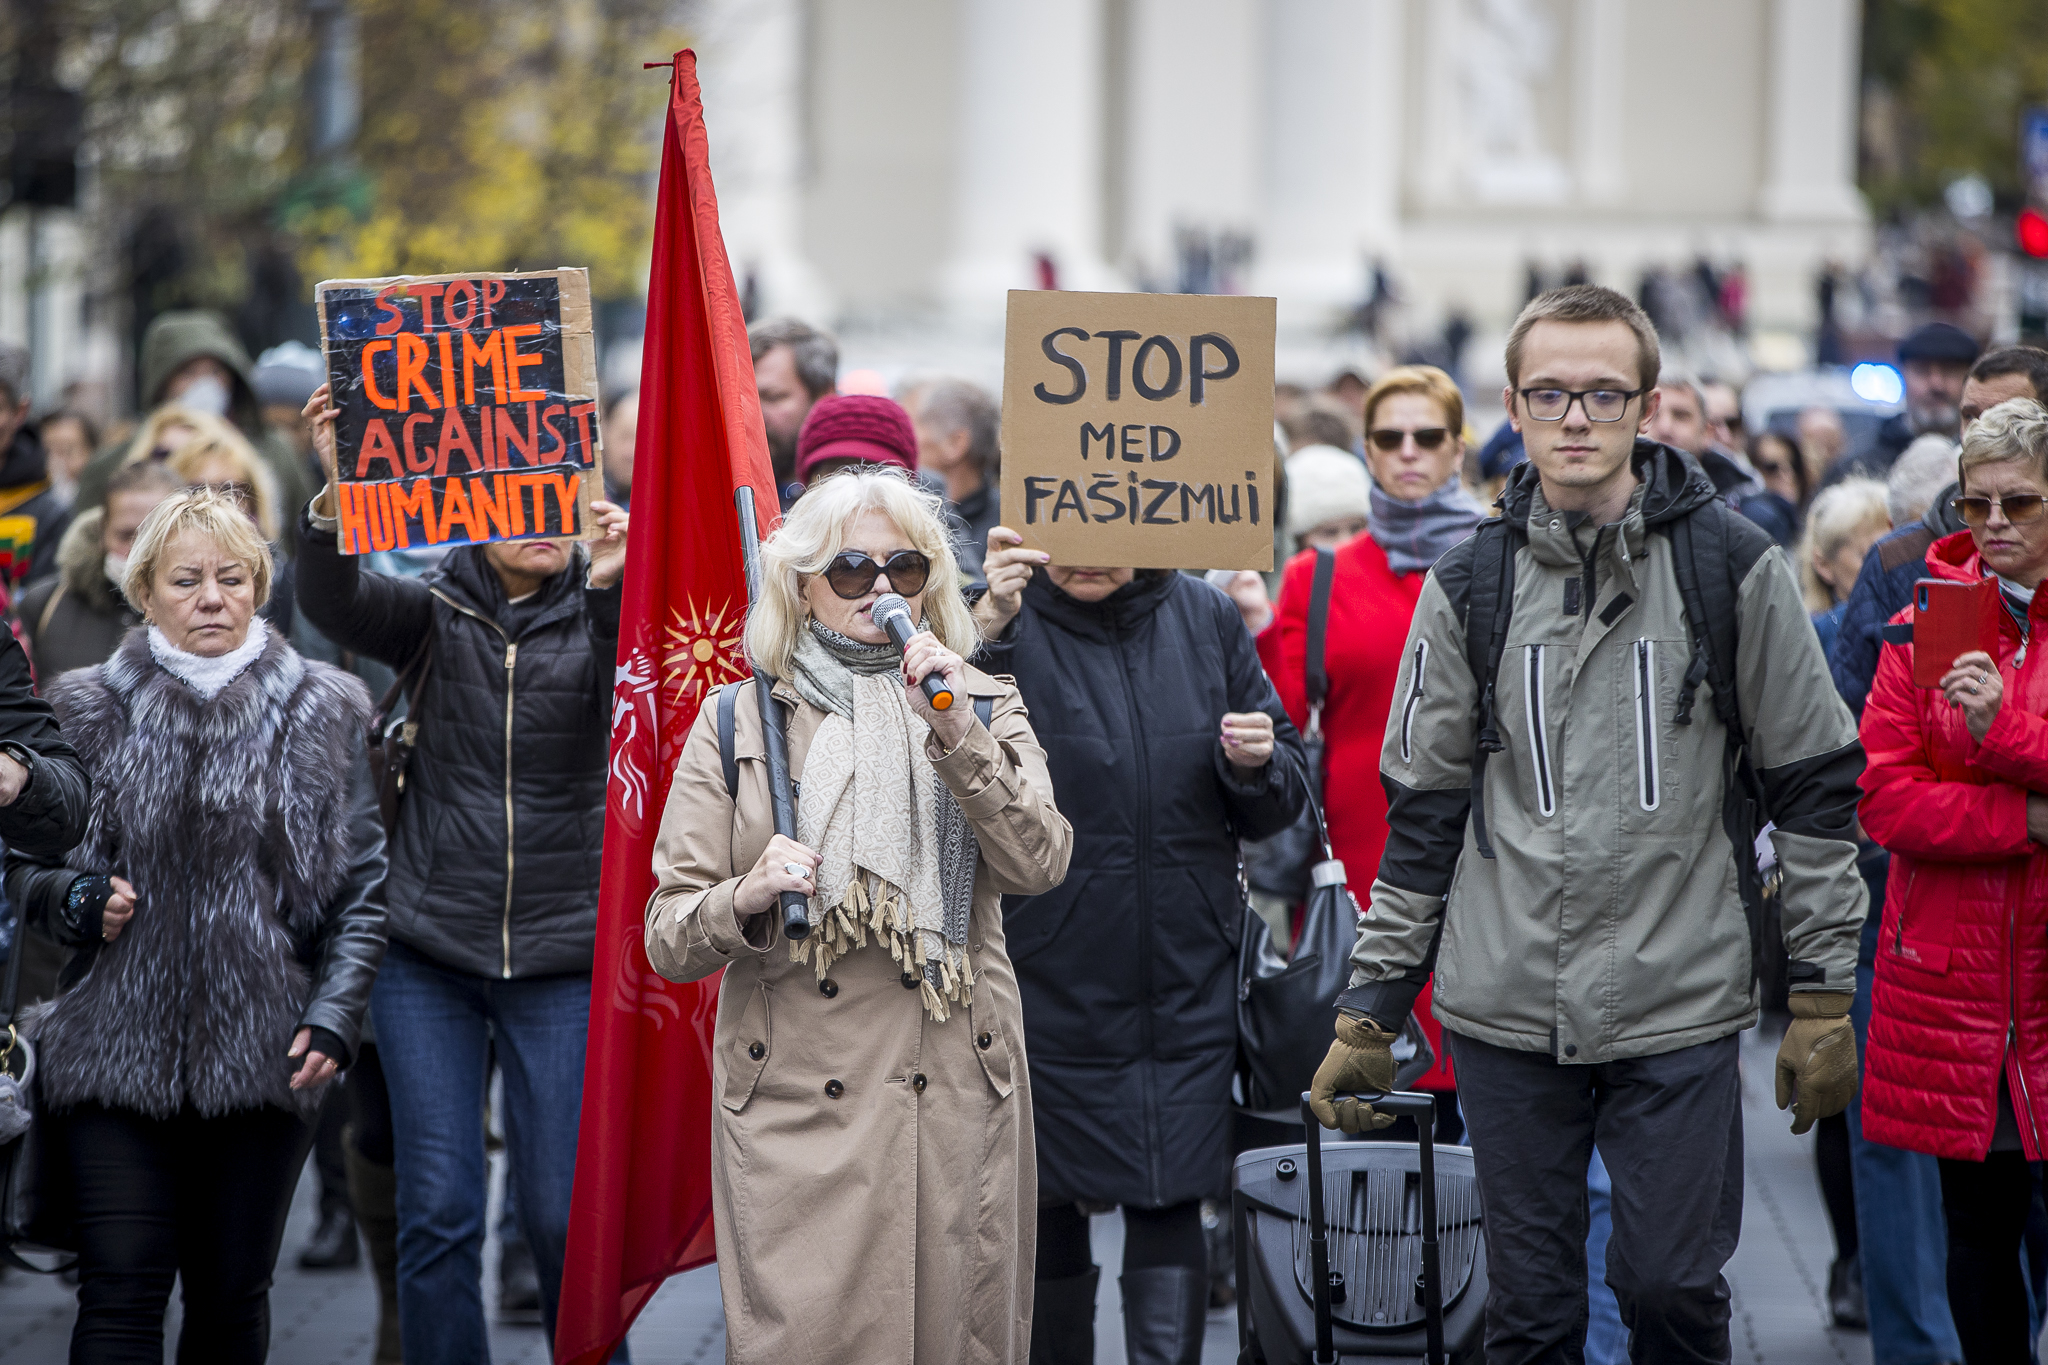 On 2021/10/16, AGAstrauskaitė called for a protest against the government's alleged repressive policy. in 2021 October 16